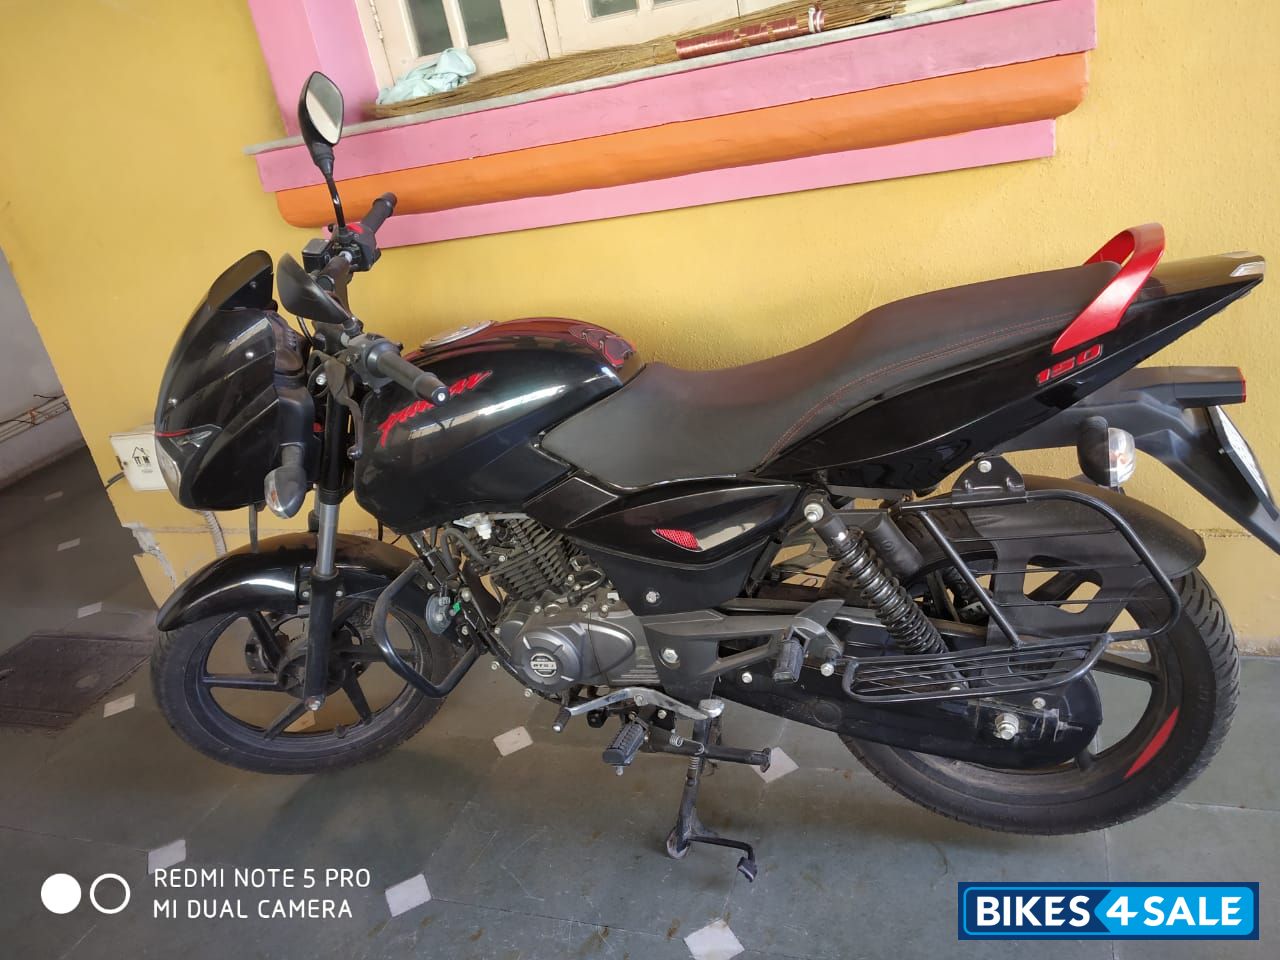 Second Hand Pulsar 125 on Sale, SAVE 58%